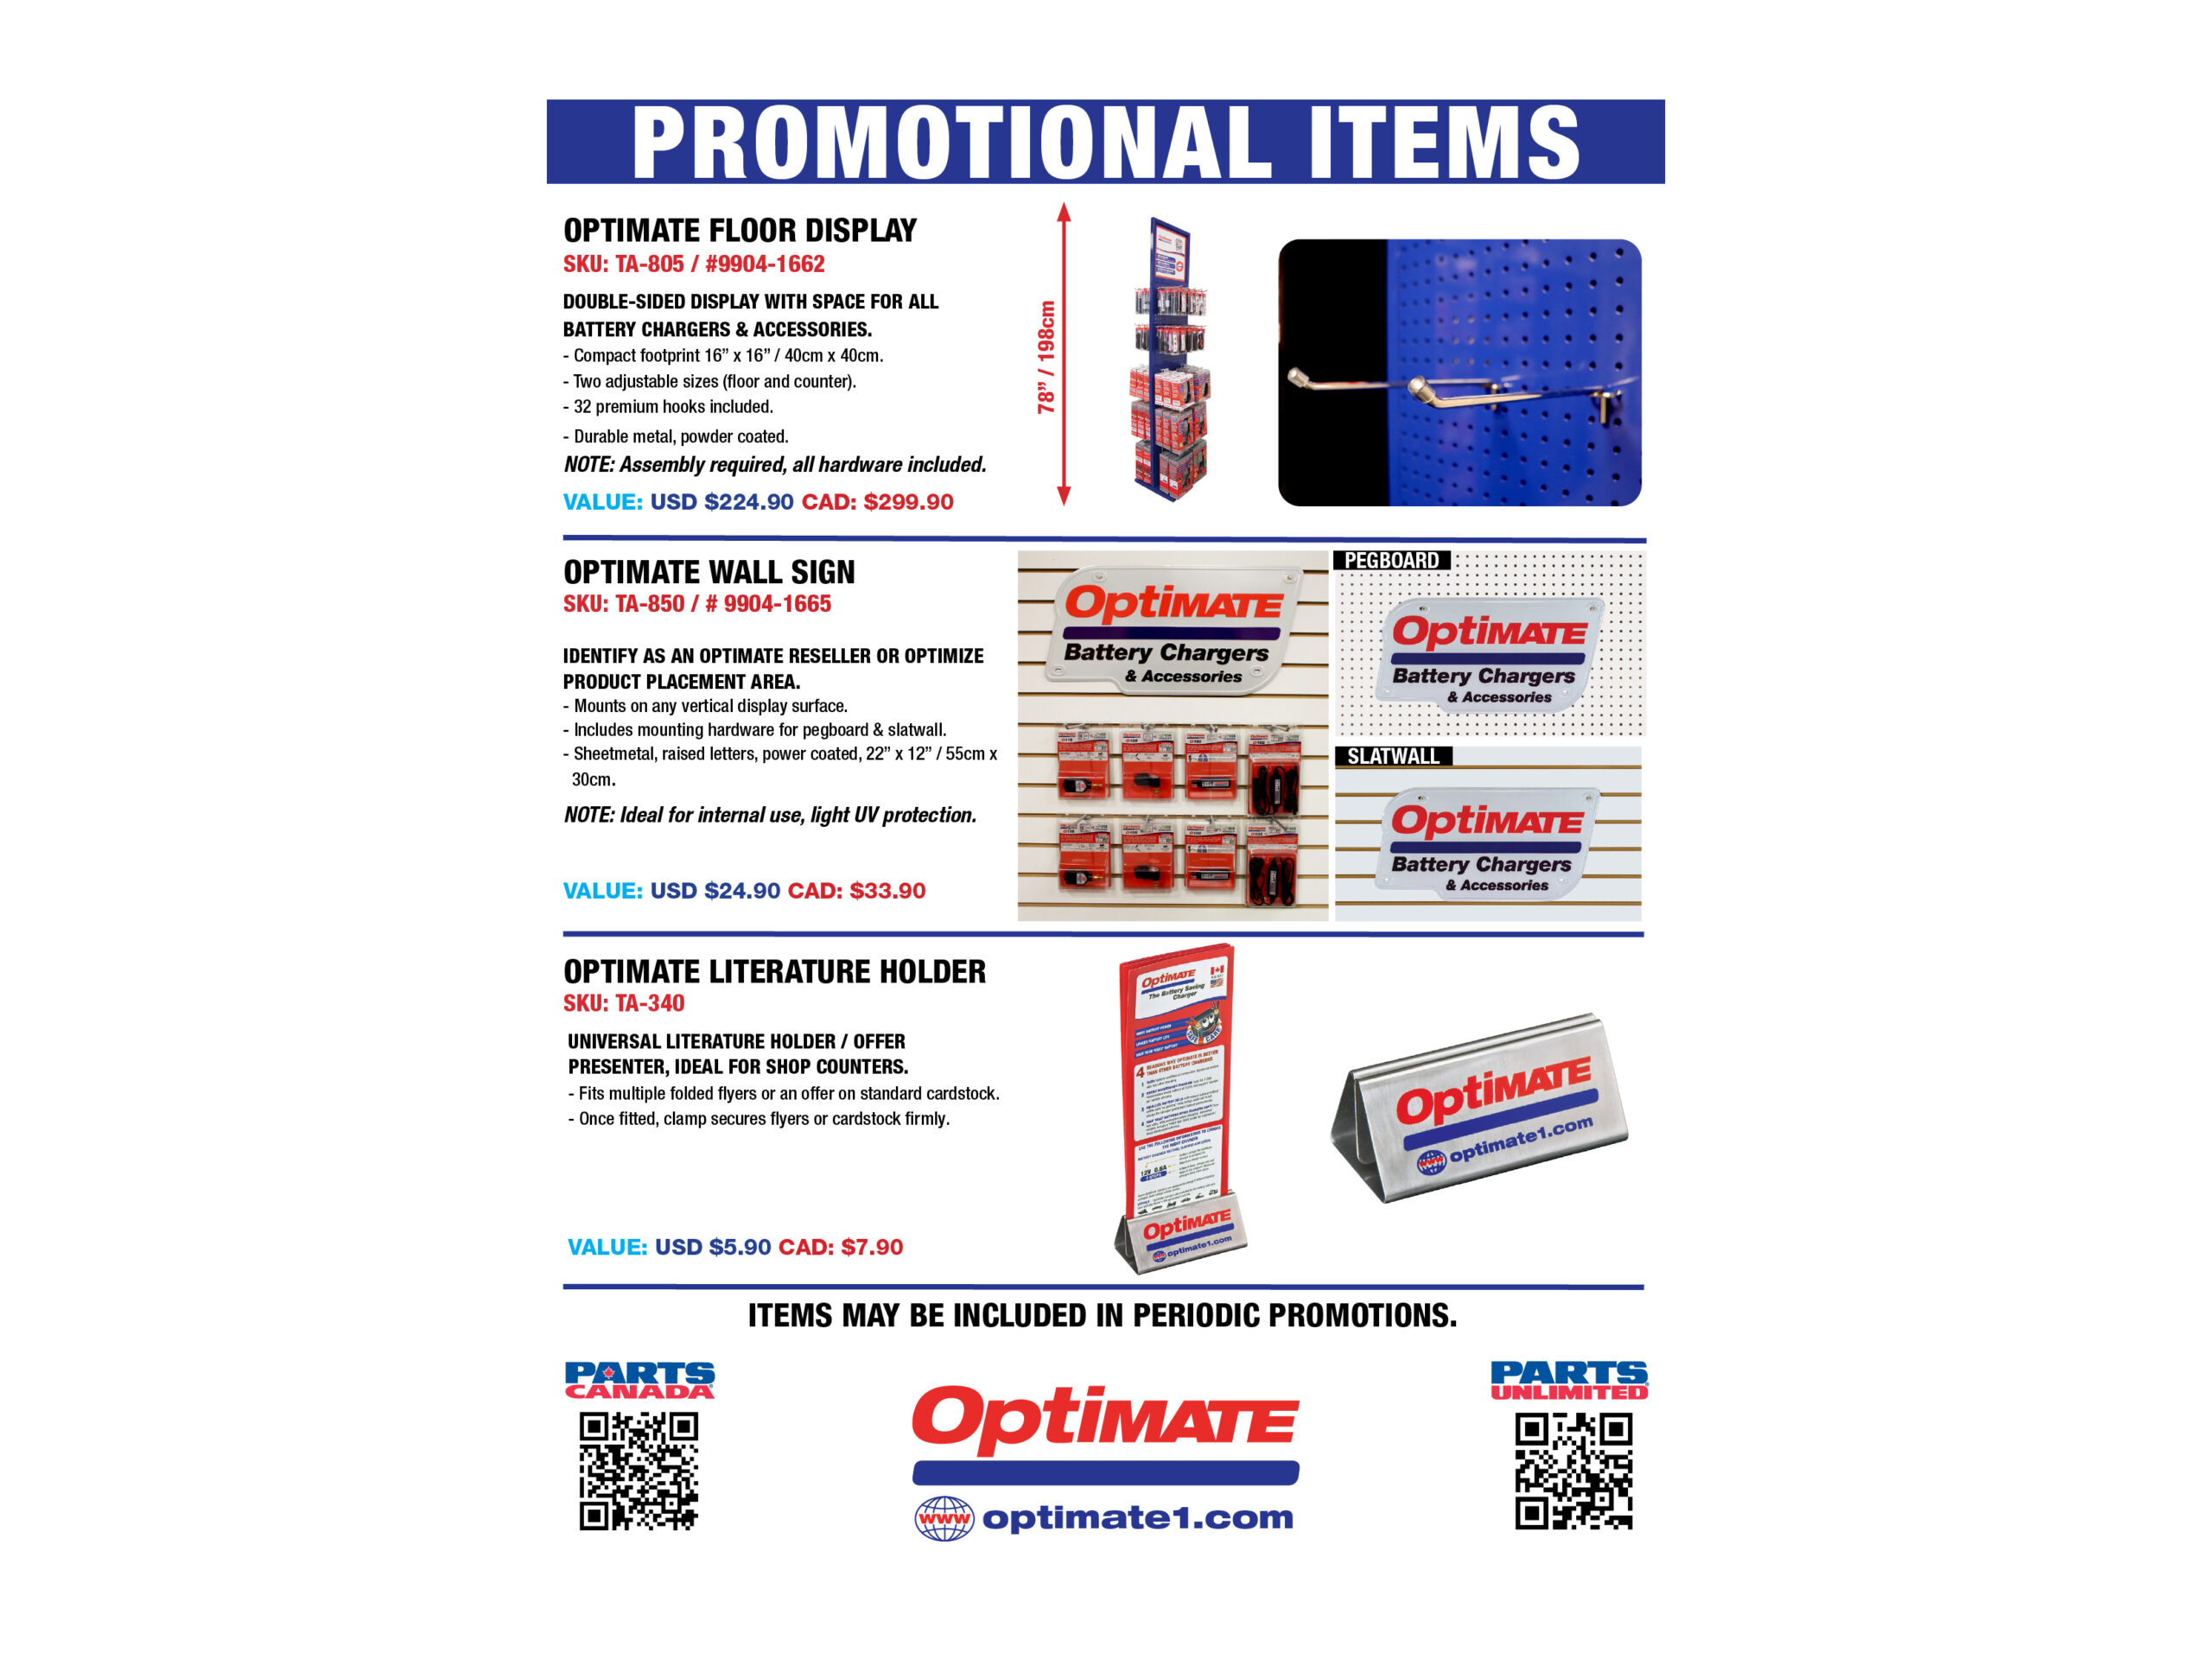 OptiMate's promotional items CAD-USD